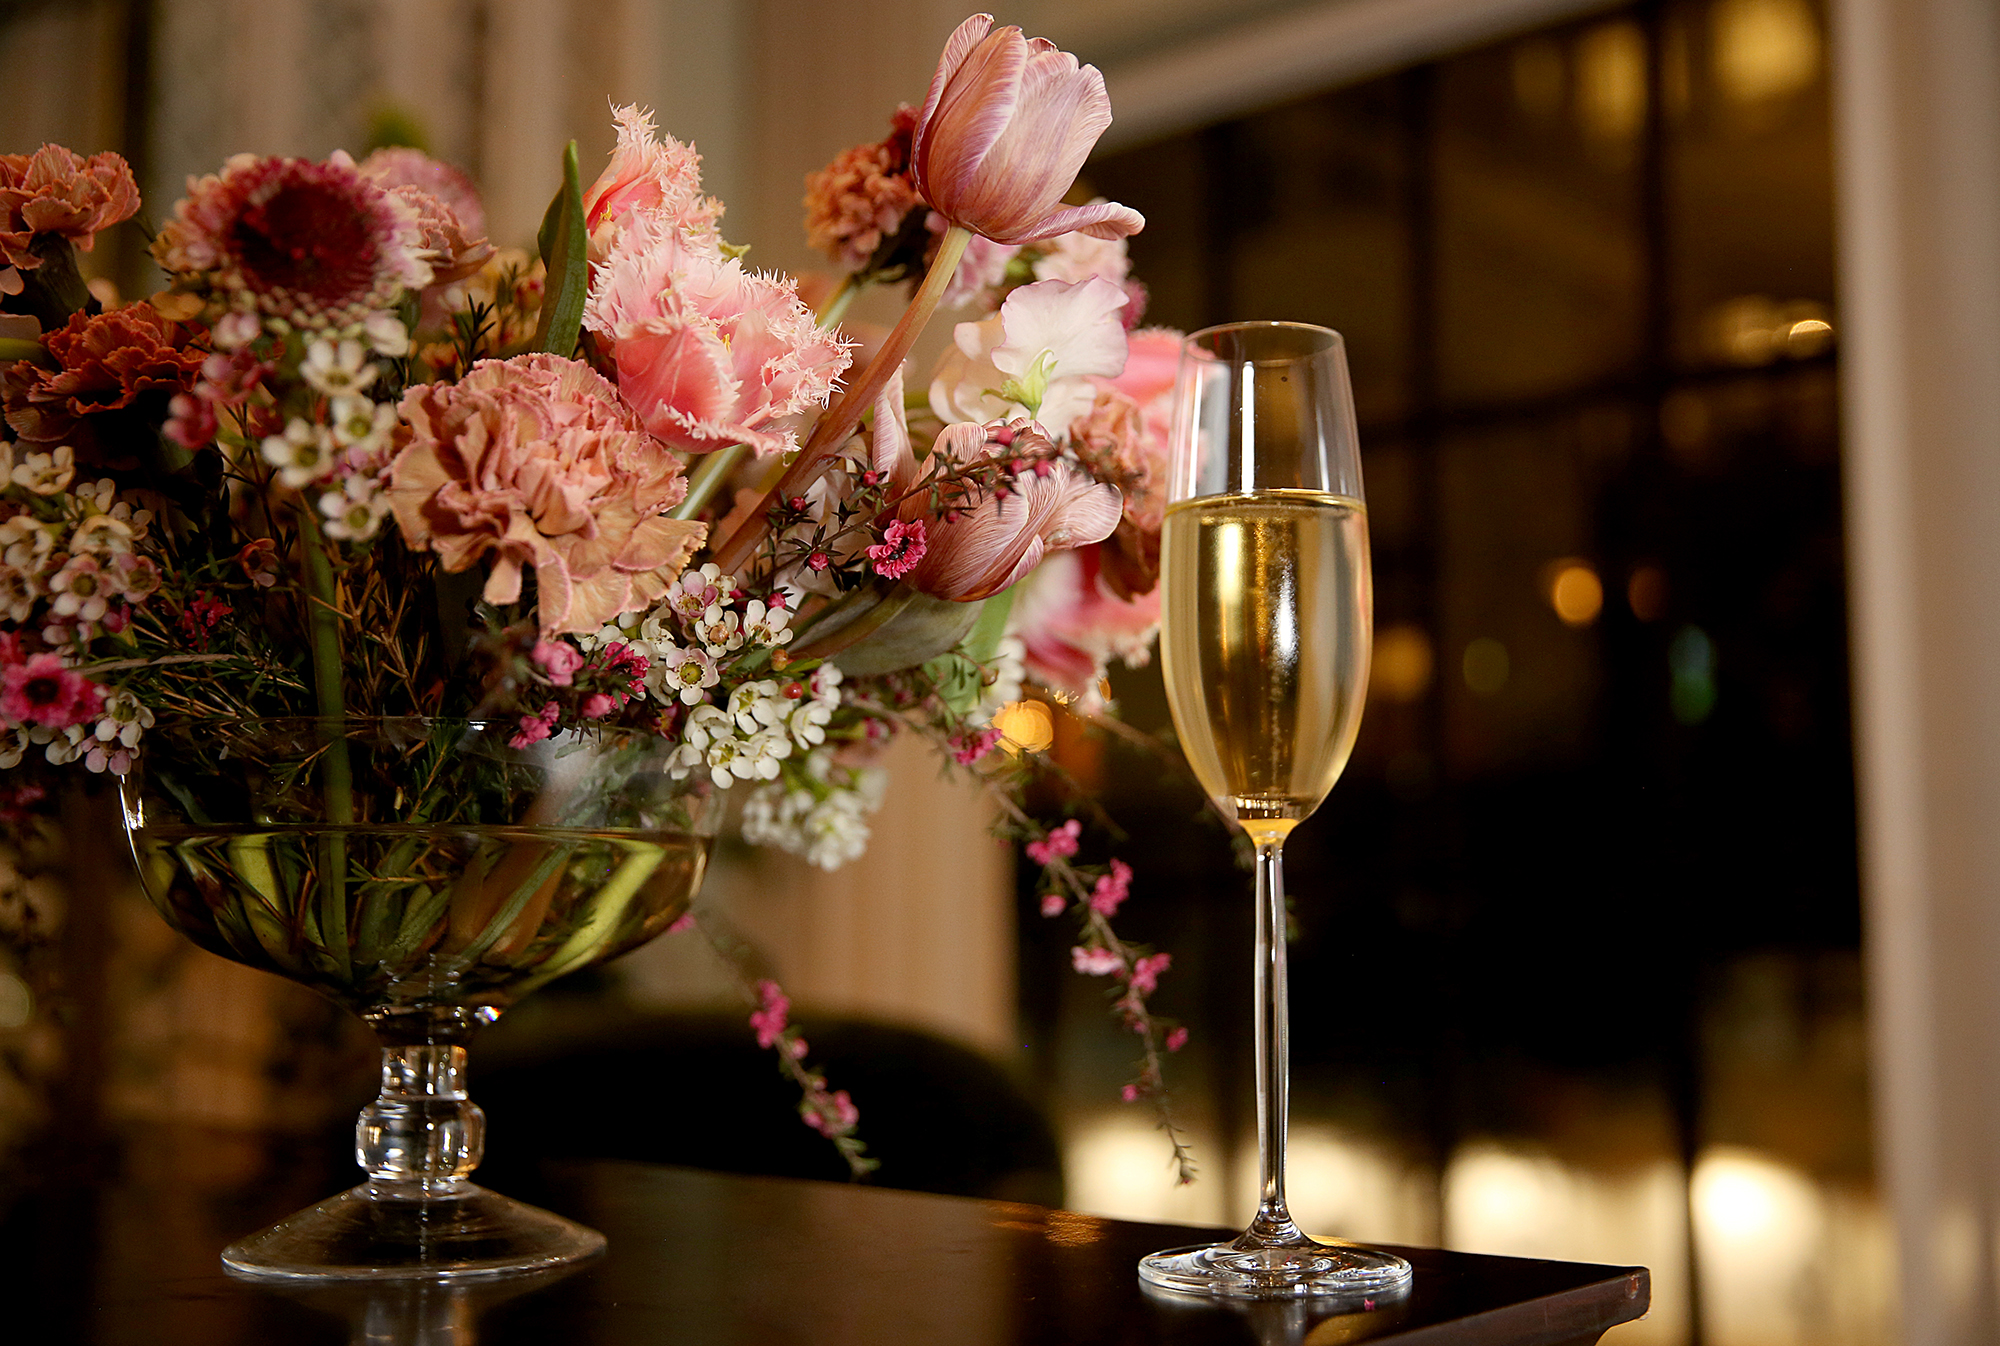 Bouquet of flowers with glass of Sekt